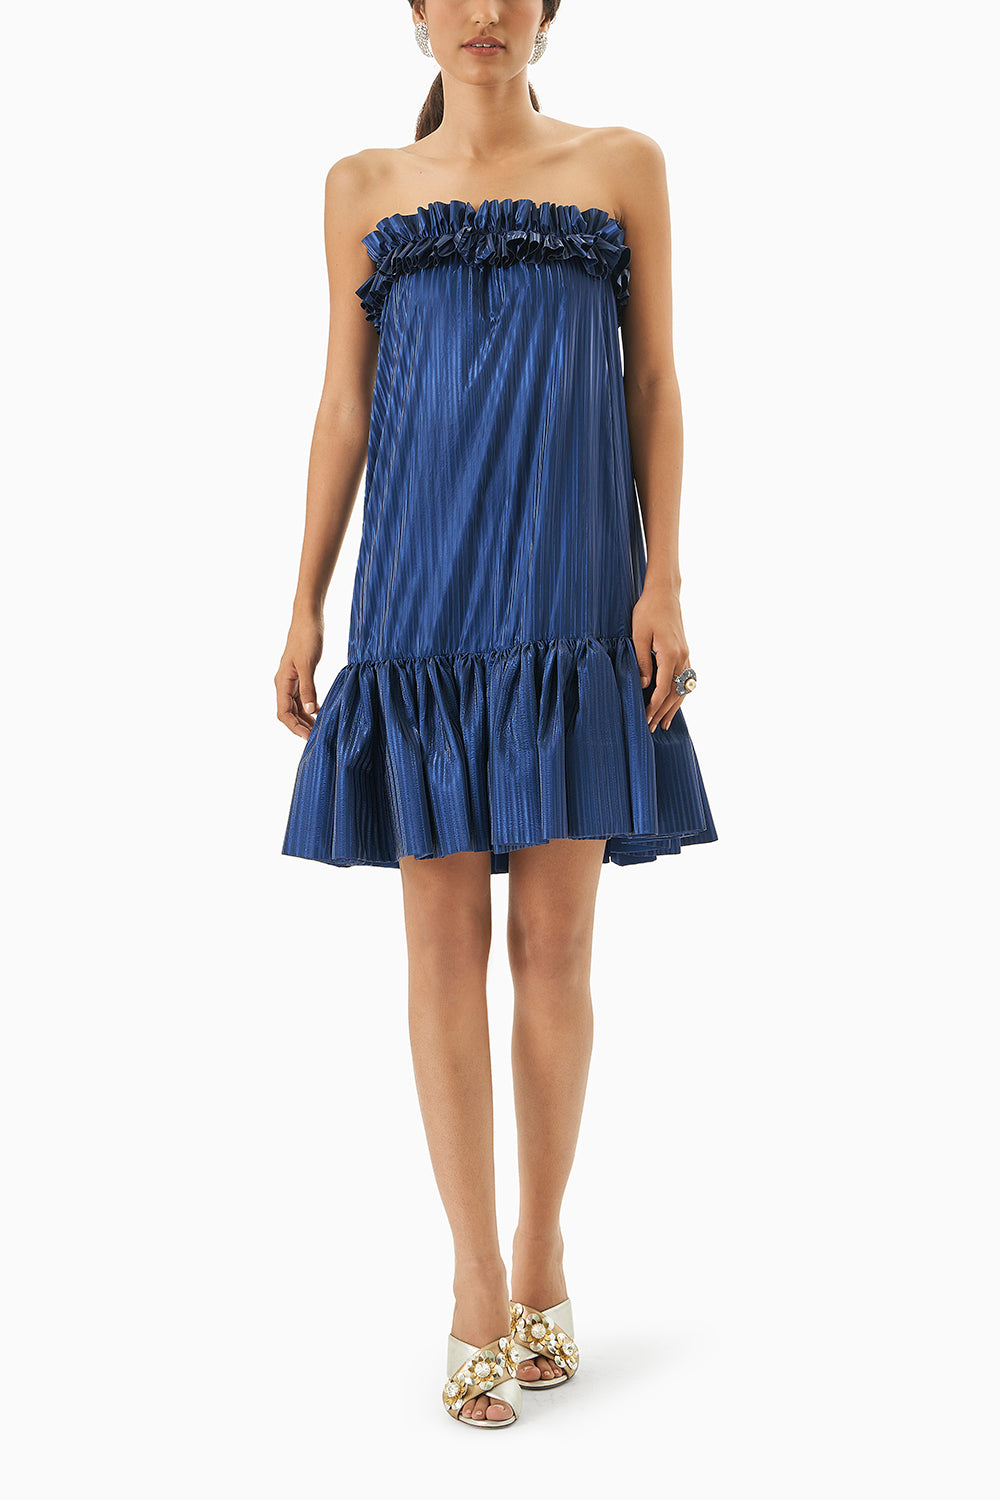 Electric Blue Ruffled Strapless Dress